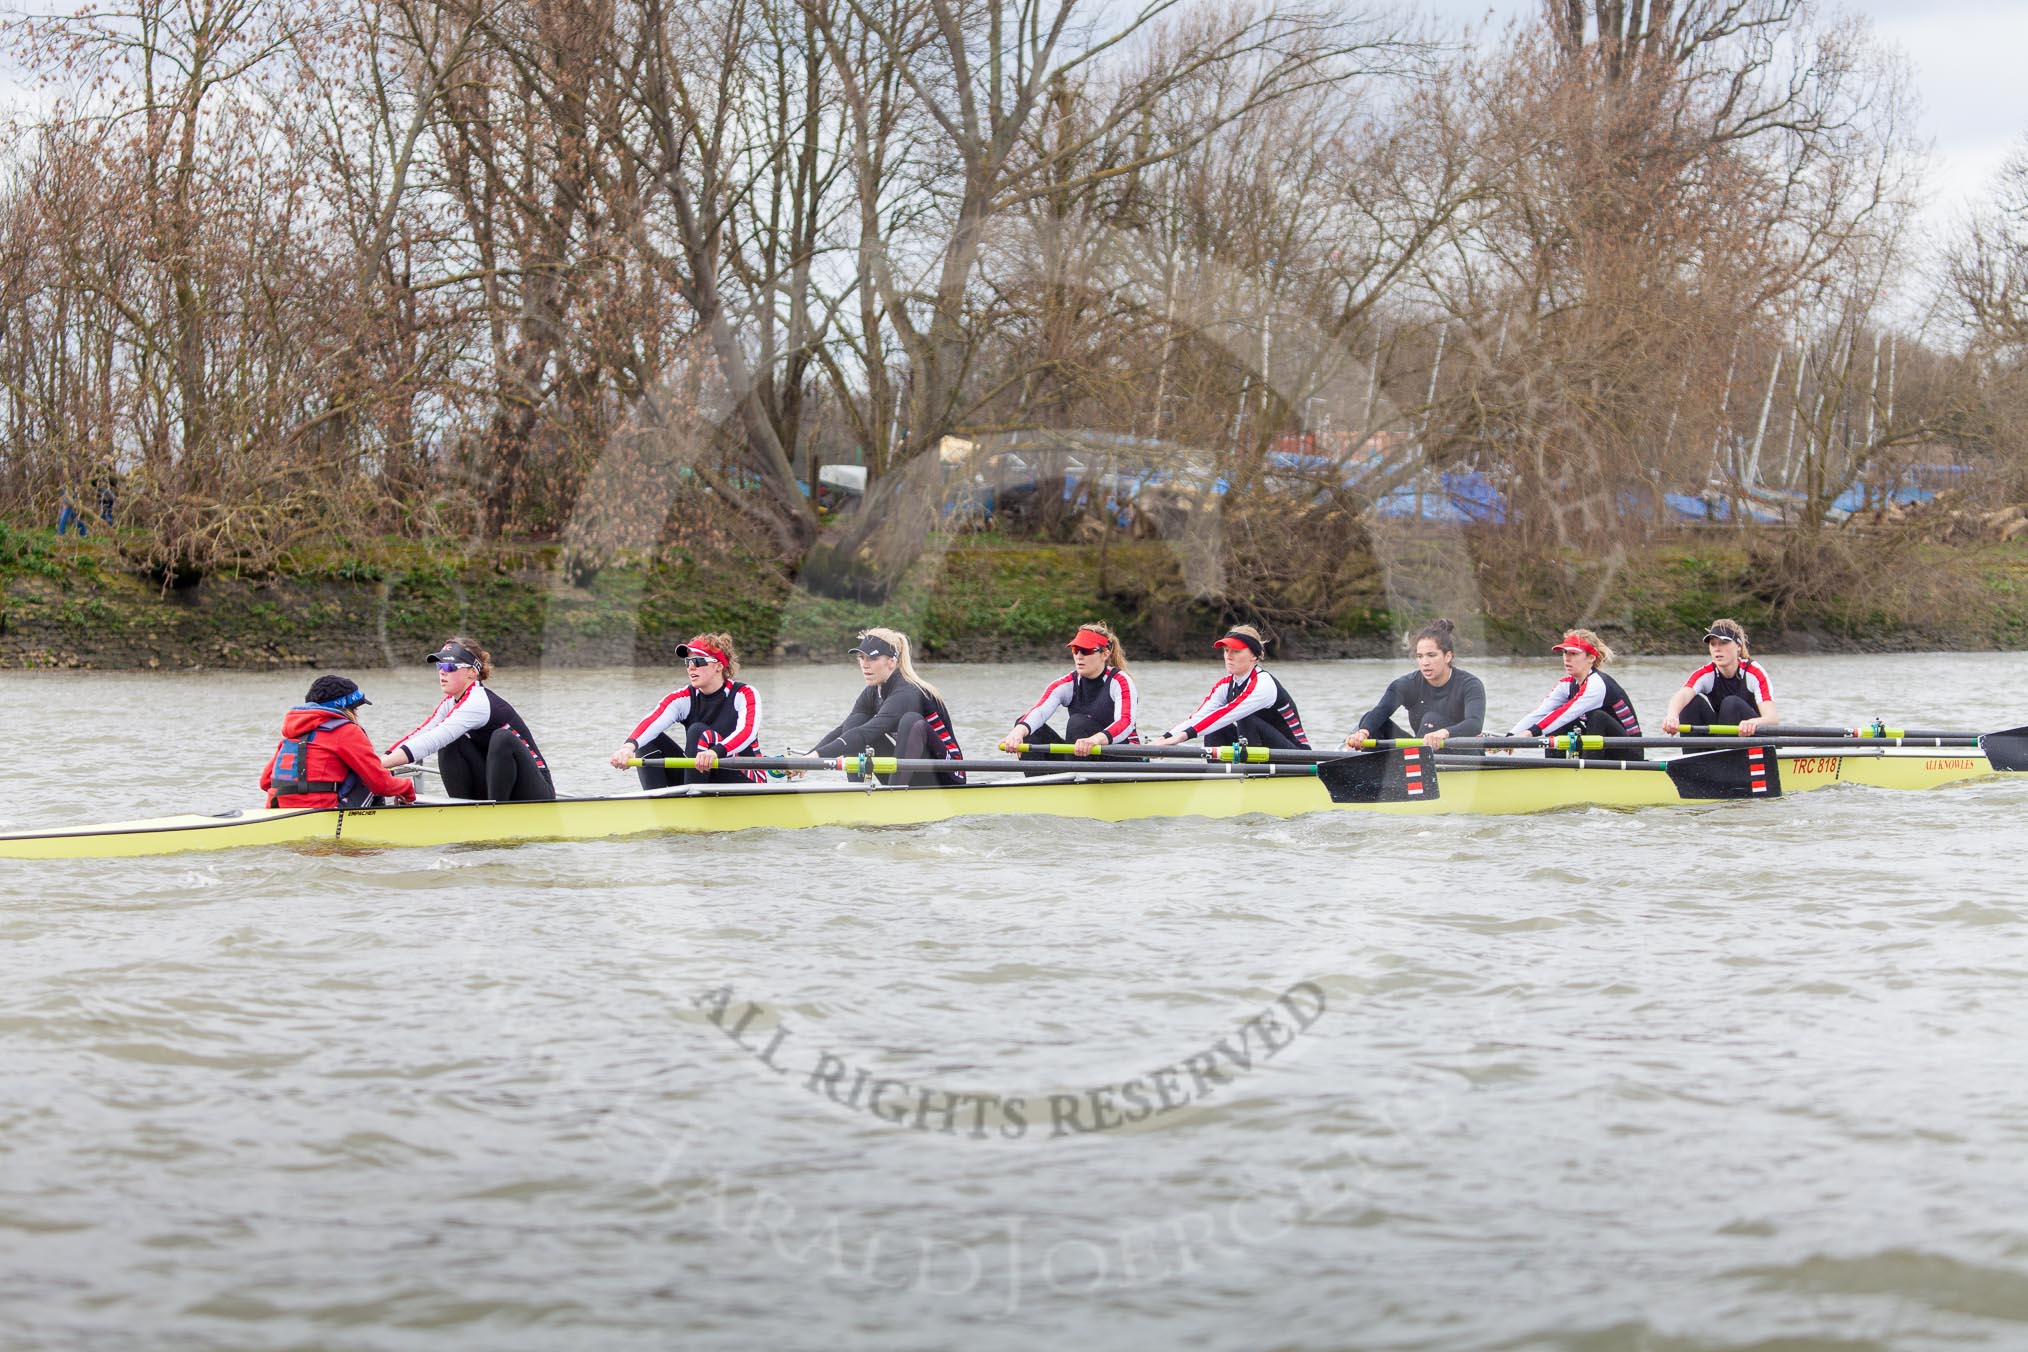 The Boat Race season 2014 - fixture CUWBC vs Thames RC: The Thames RC boat approaching the black buoy..




on 02 March 2014 at 13:12, image #67